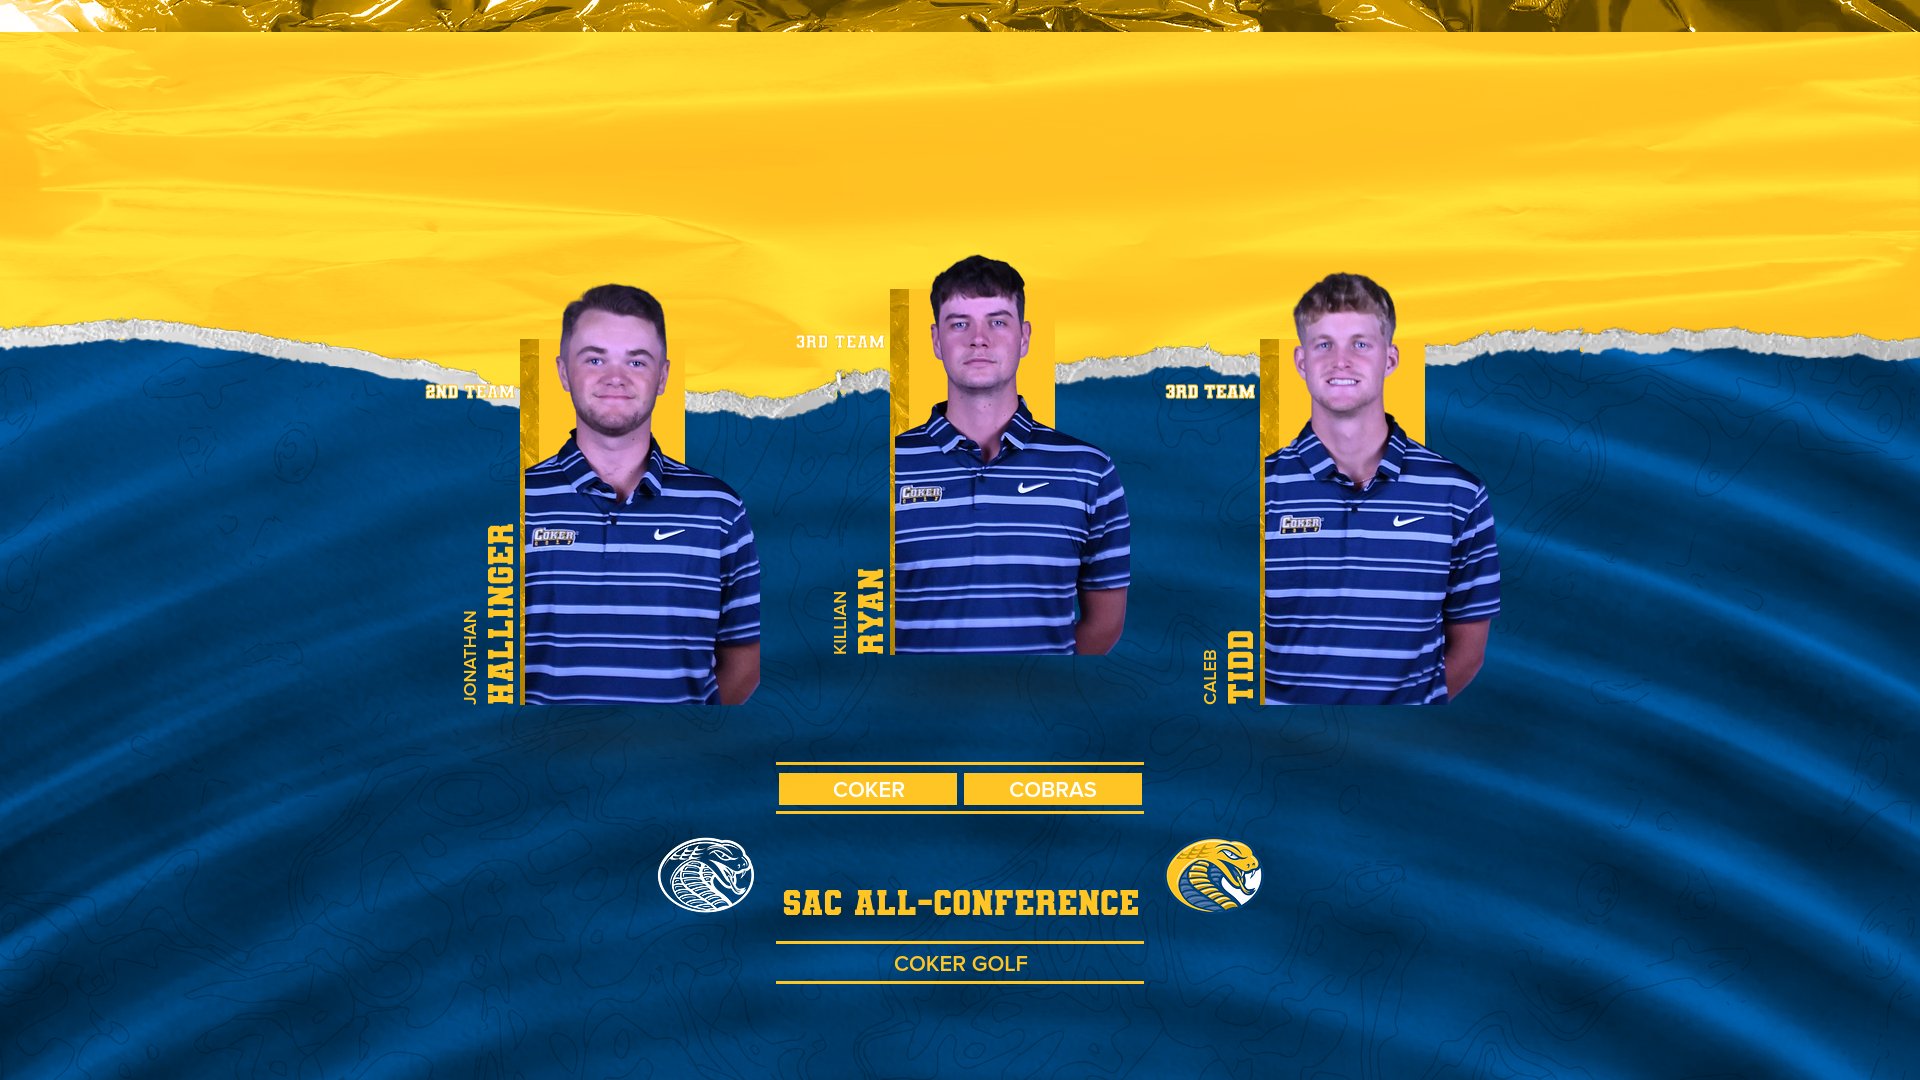 Cobras Place Three on SAC All-Conference Teams